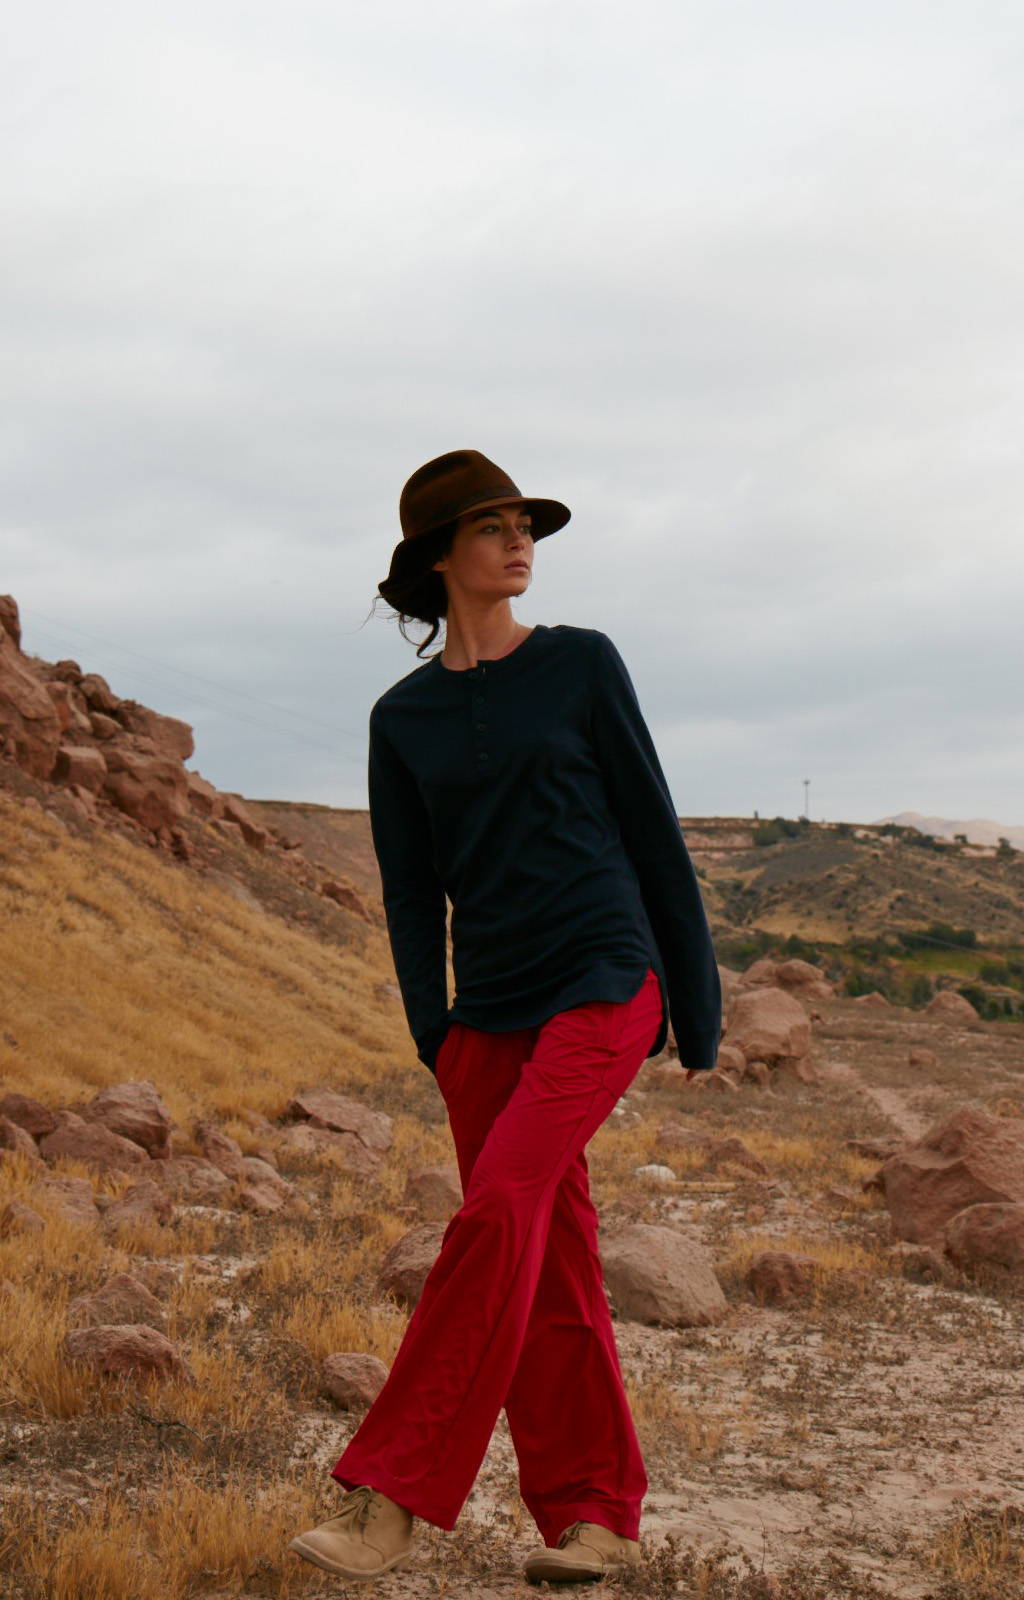 CONSCIOUS - INSANELY COMFY LONG HAUL FLIGHT PANT DARK RED